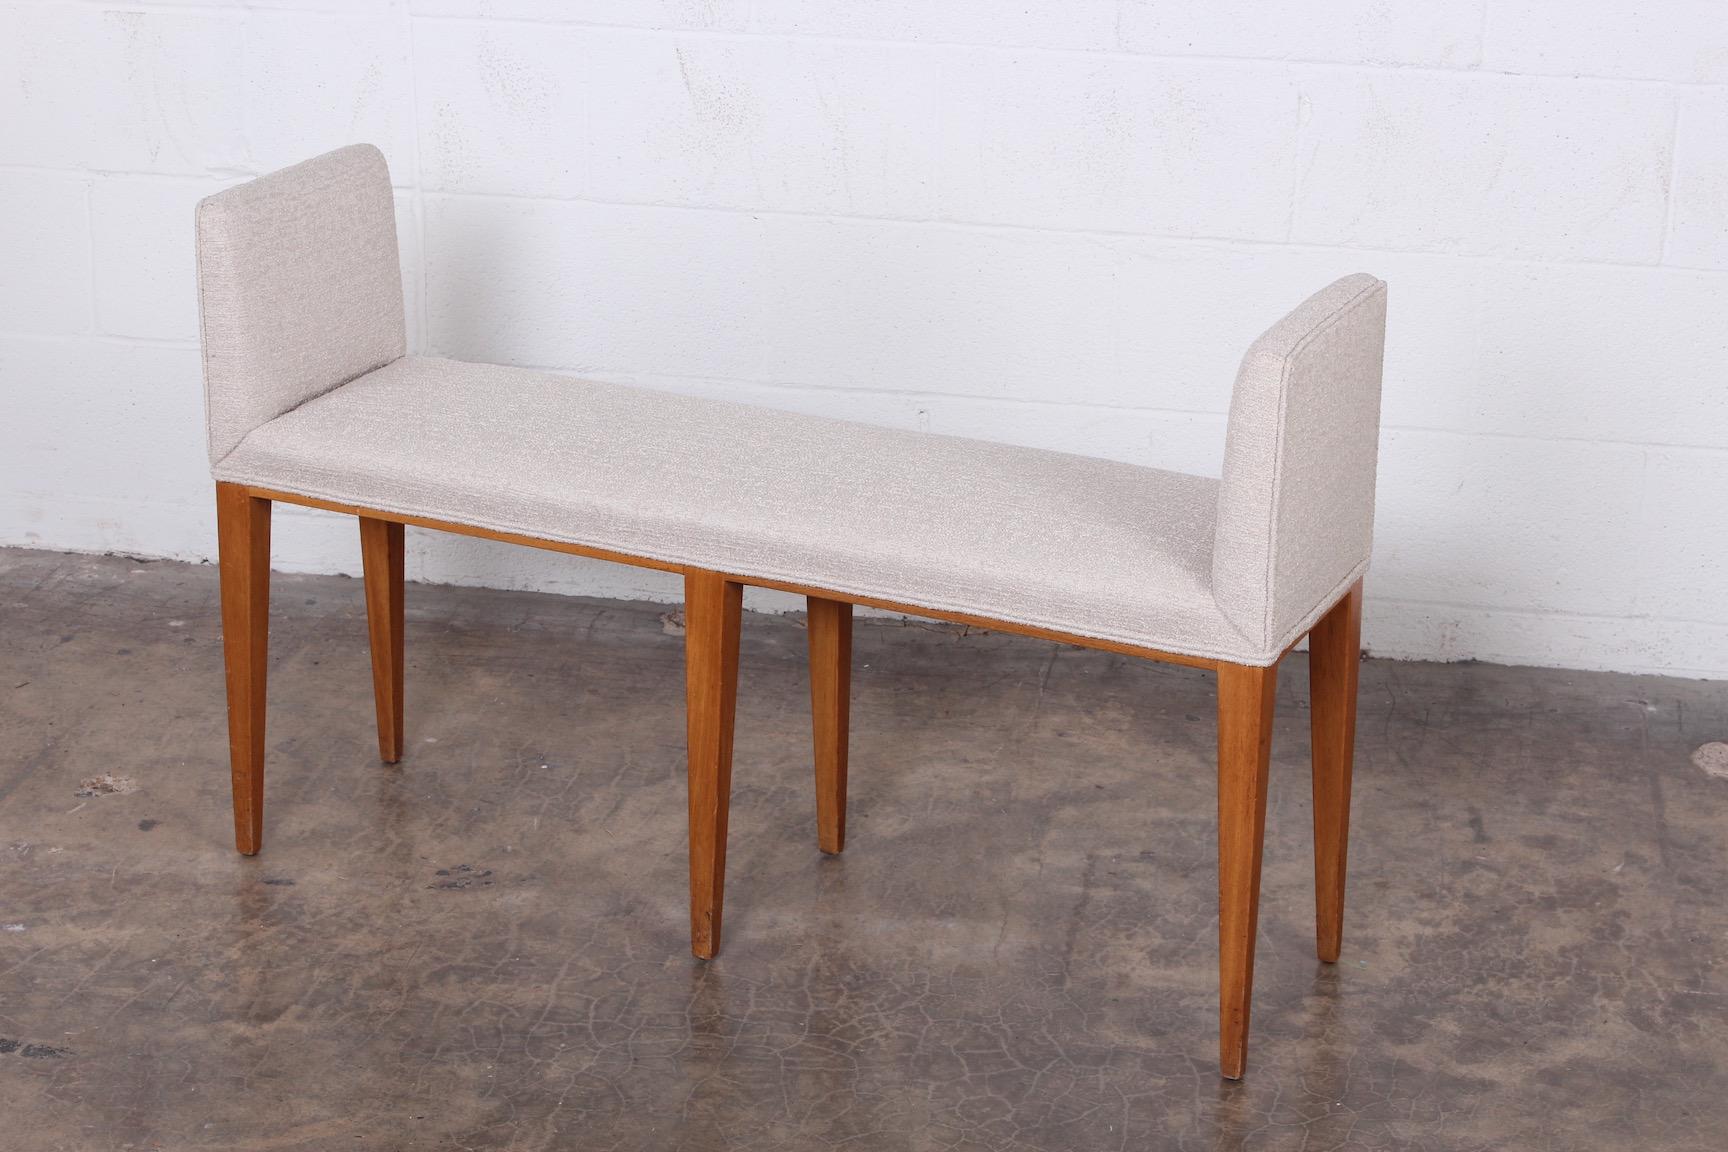 Mid-20th Century Pair of Benches by Edward Wormley for Dunbar